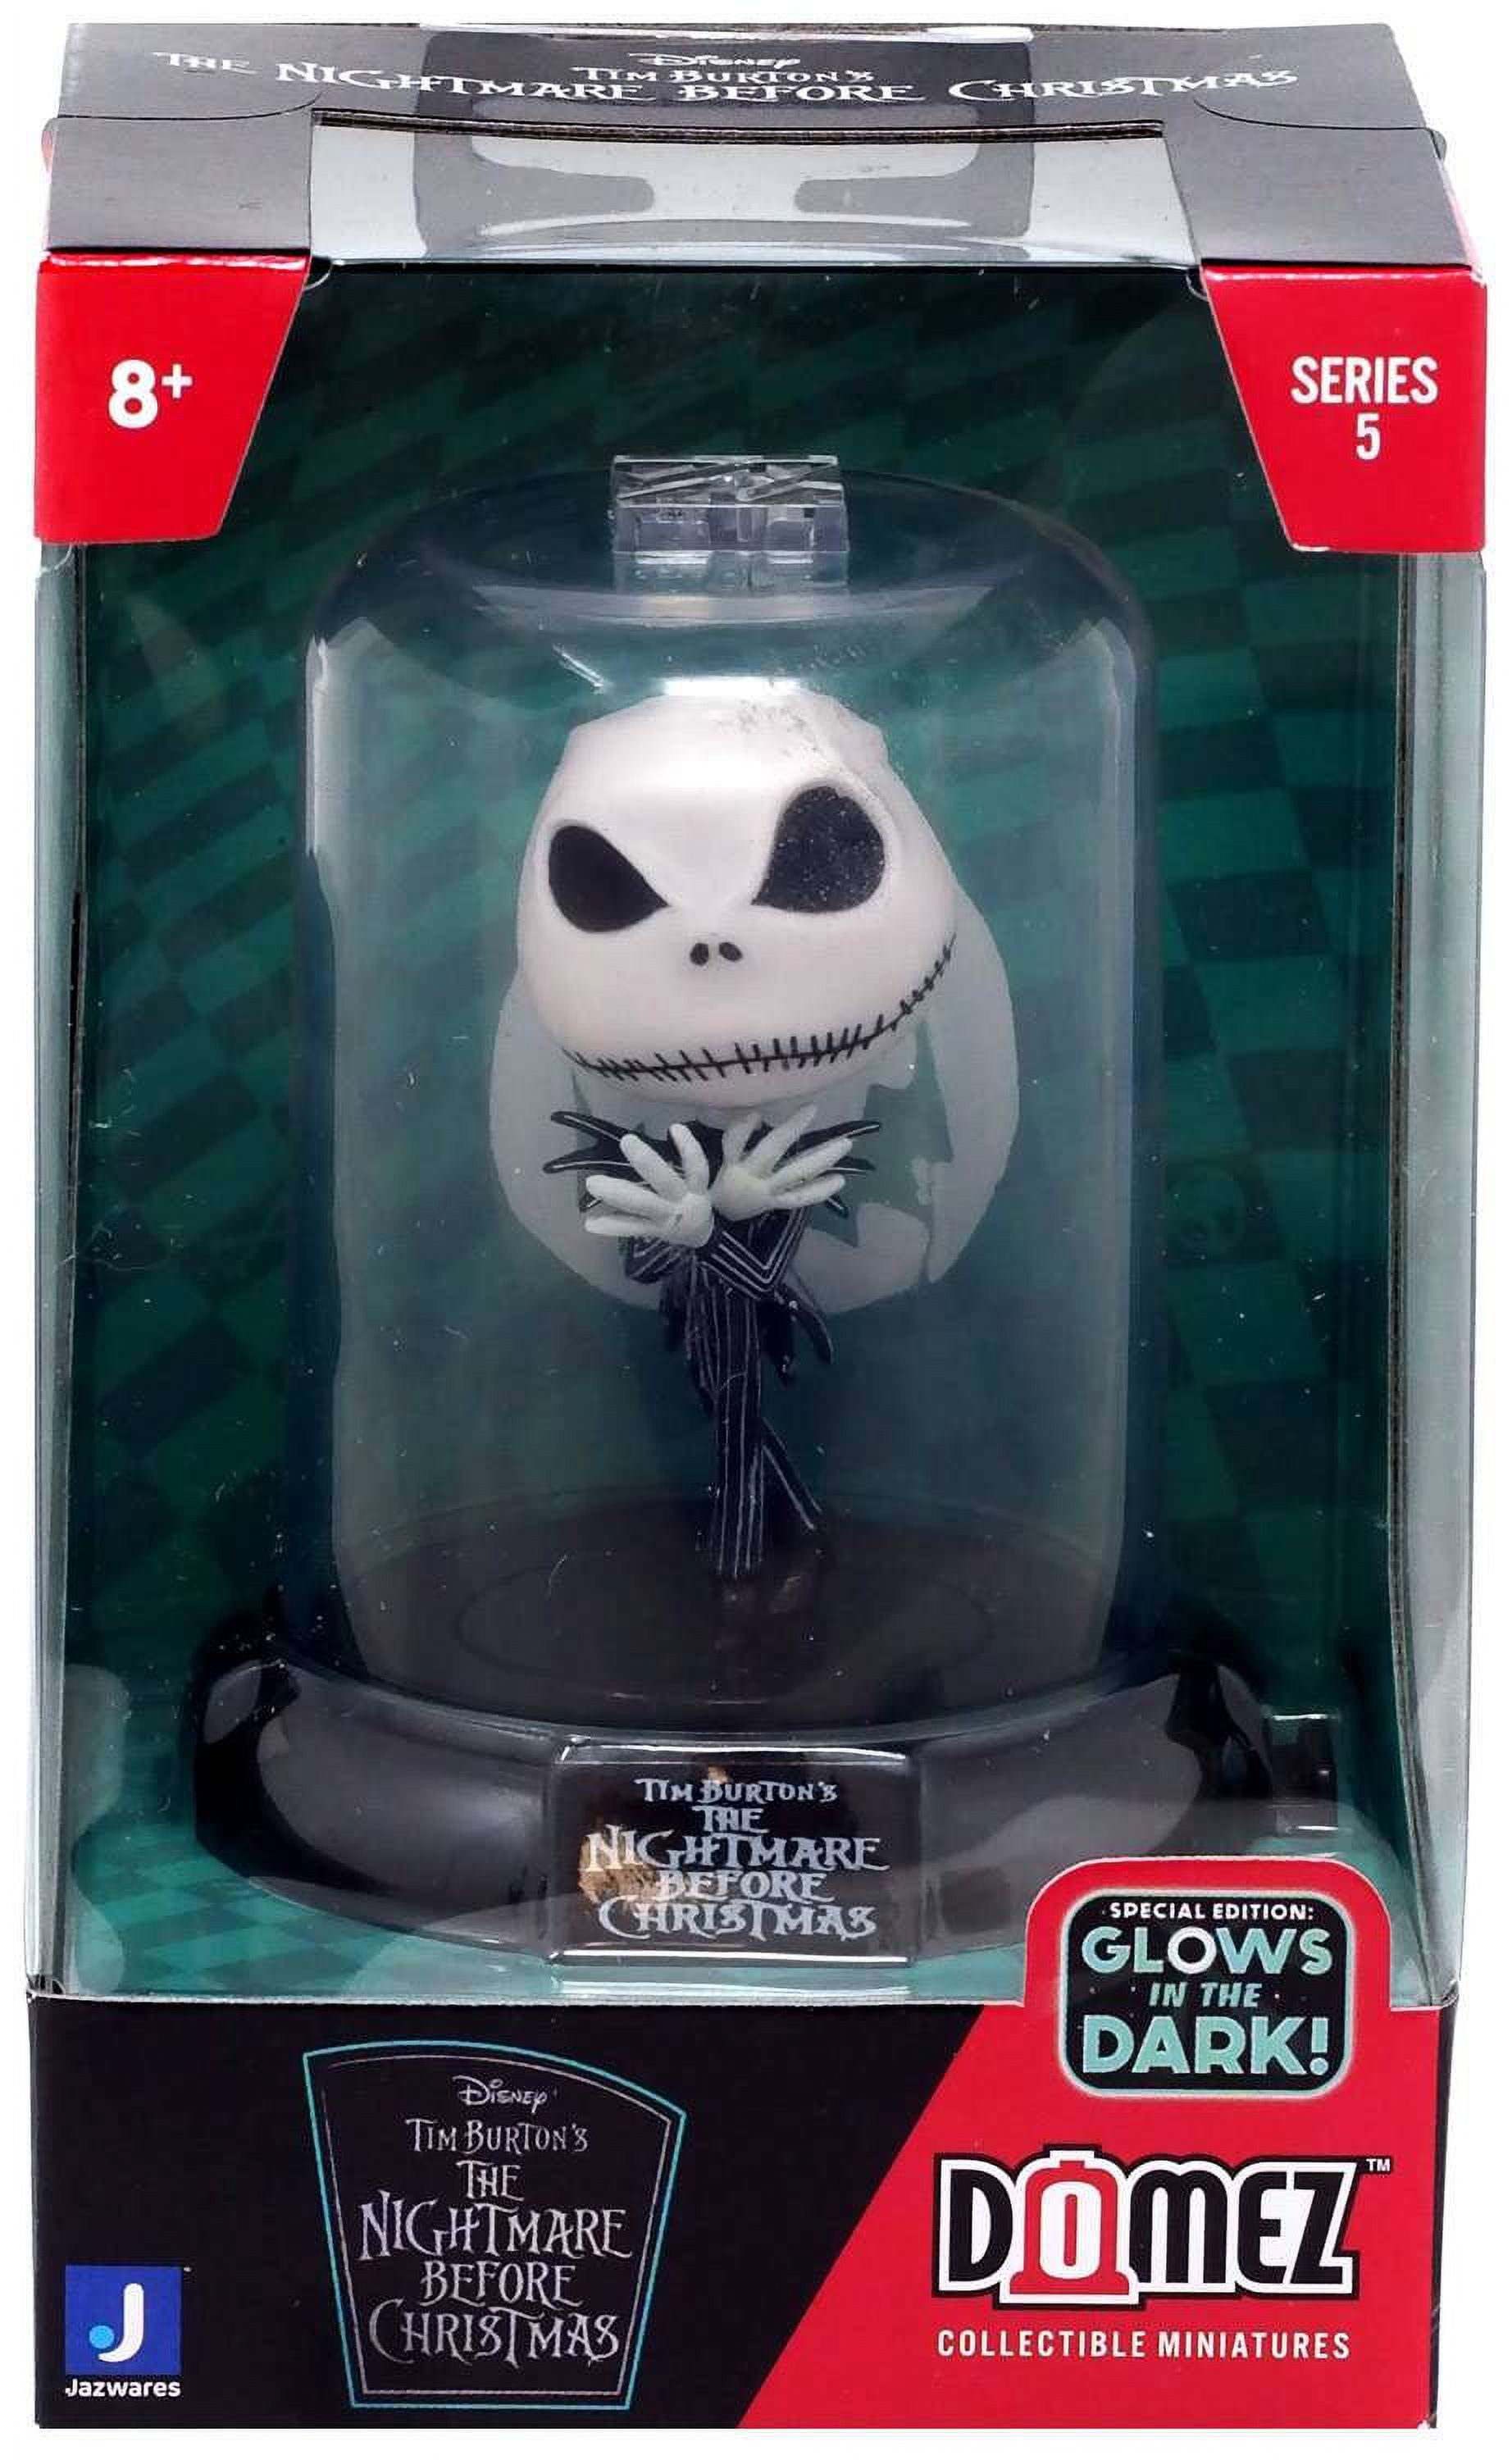  Funko Bitty Pop! The Nightmare Before Christmas Mini  Collectible Toys 4-Pack - Sally, Jack Skellington, Zero & Mystery Chase  Figure (Styles May Vary) : Toys & Games